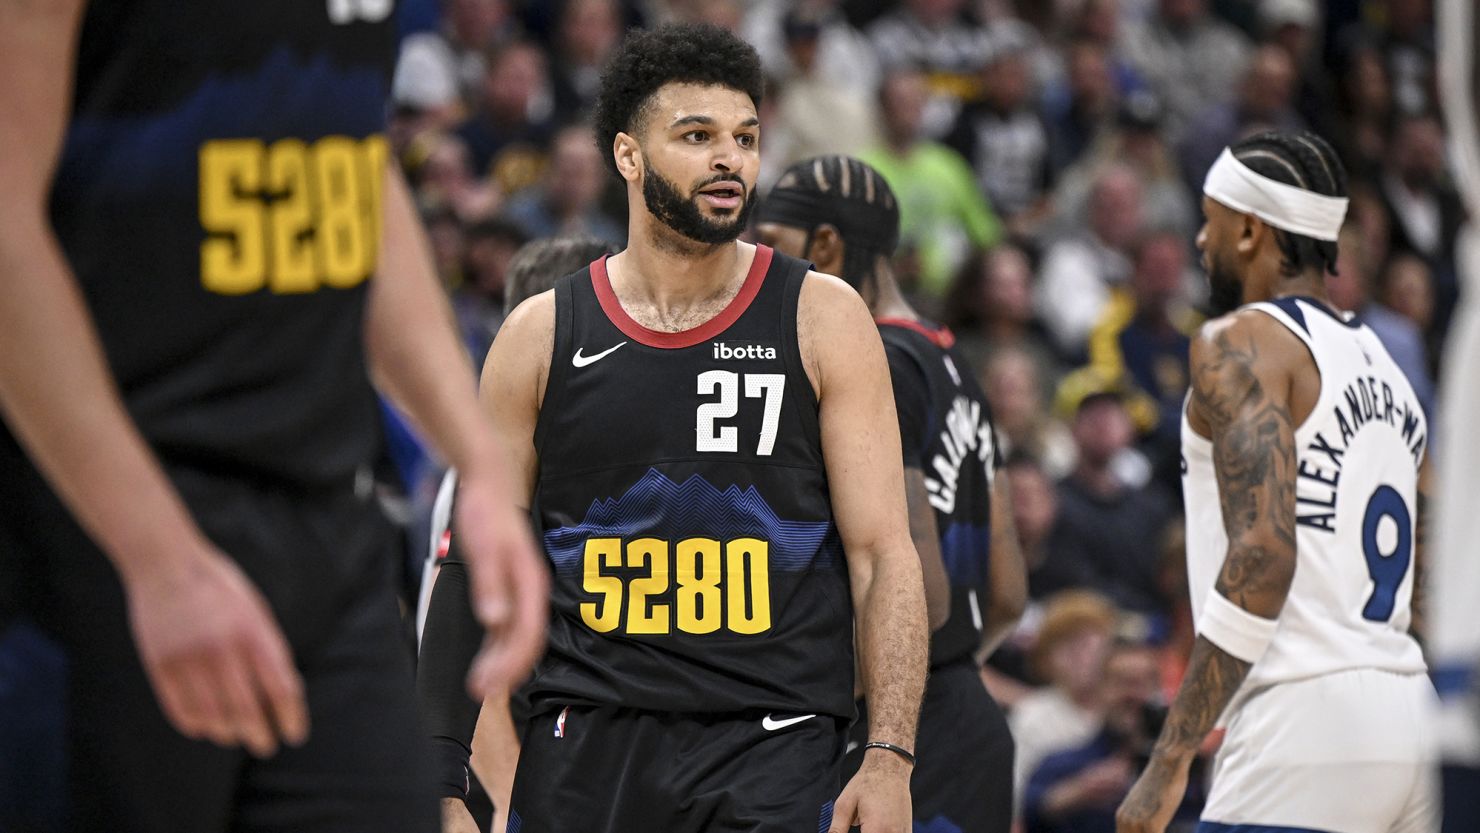 Denver Nuggets star jamal murray threw a hot bag on the court and was labeled as "unforgivable" and "dangerous" by the Minnesota head coach.